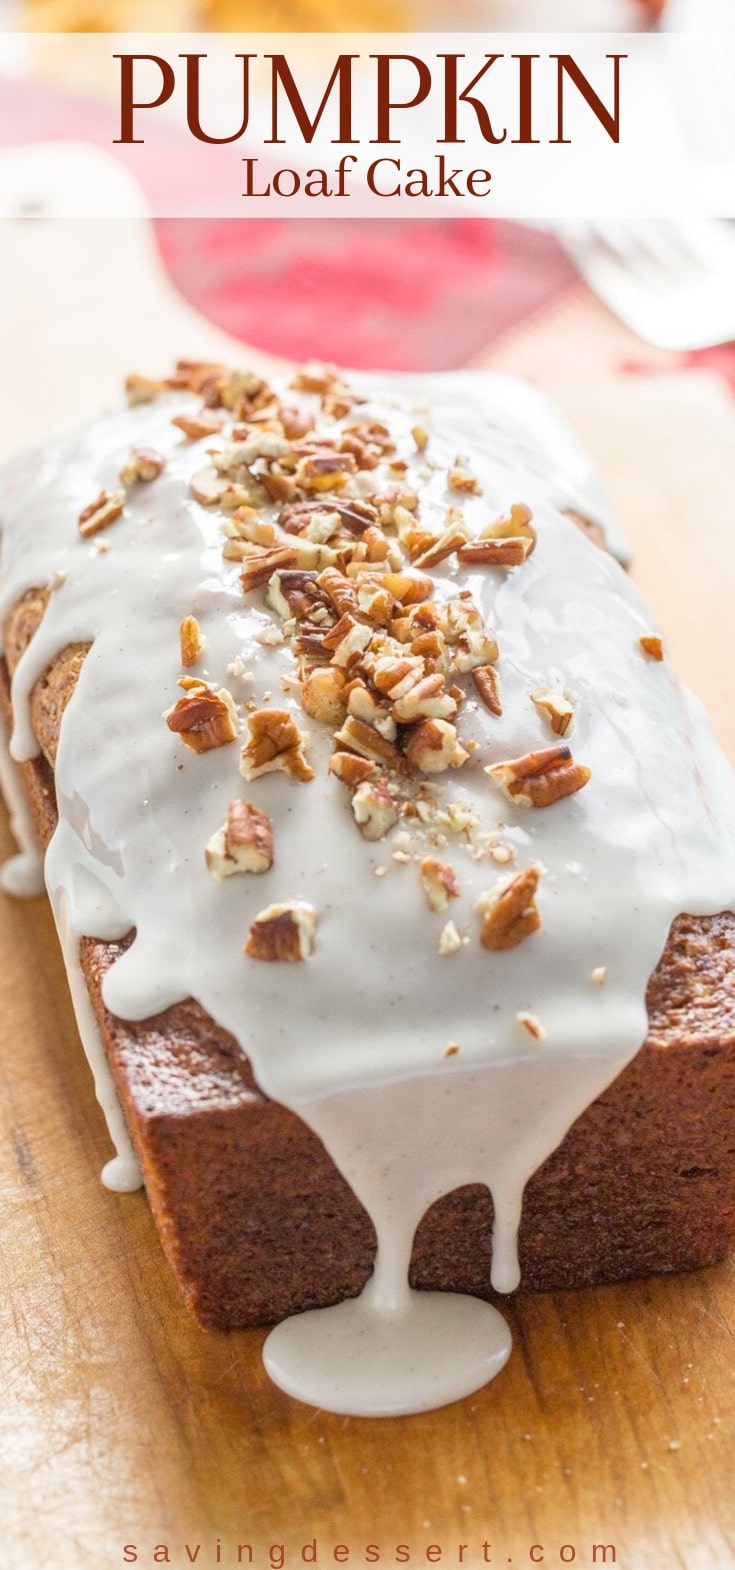 Pumpkin Loaf Cake topped with a simple vanilla icing and chopped pecans